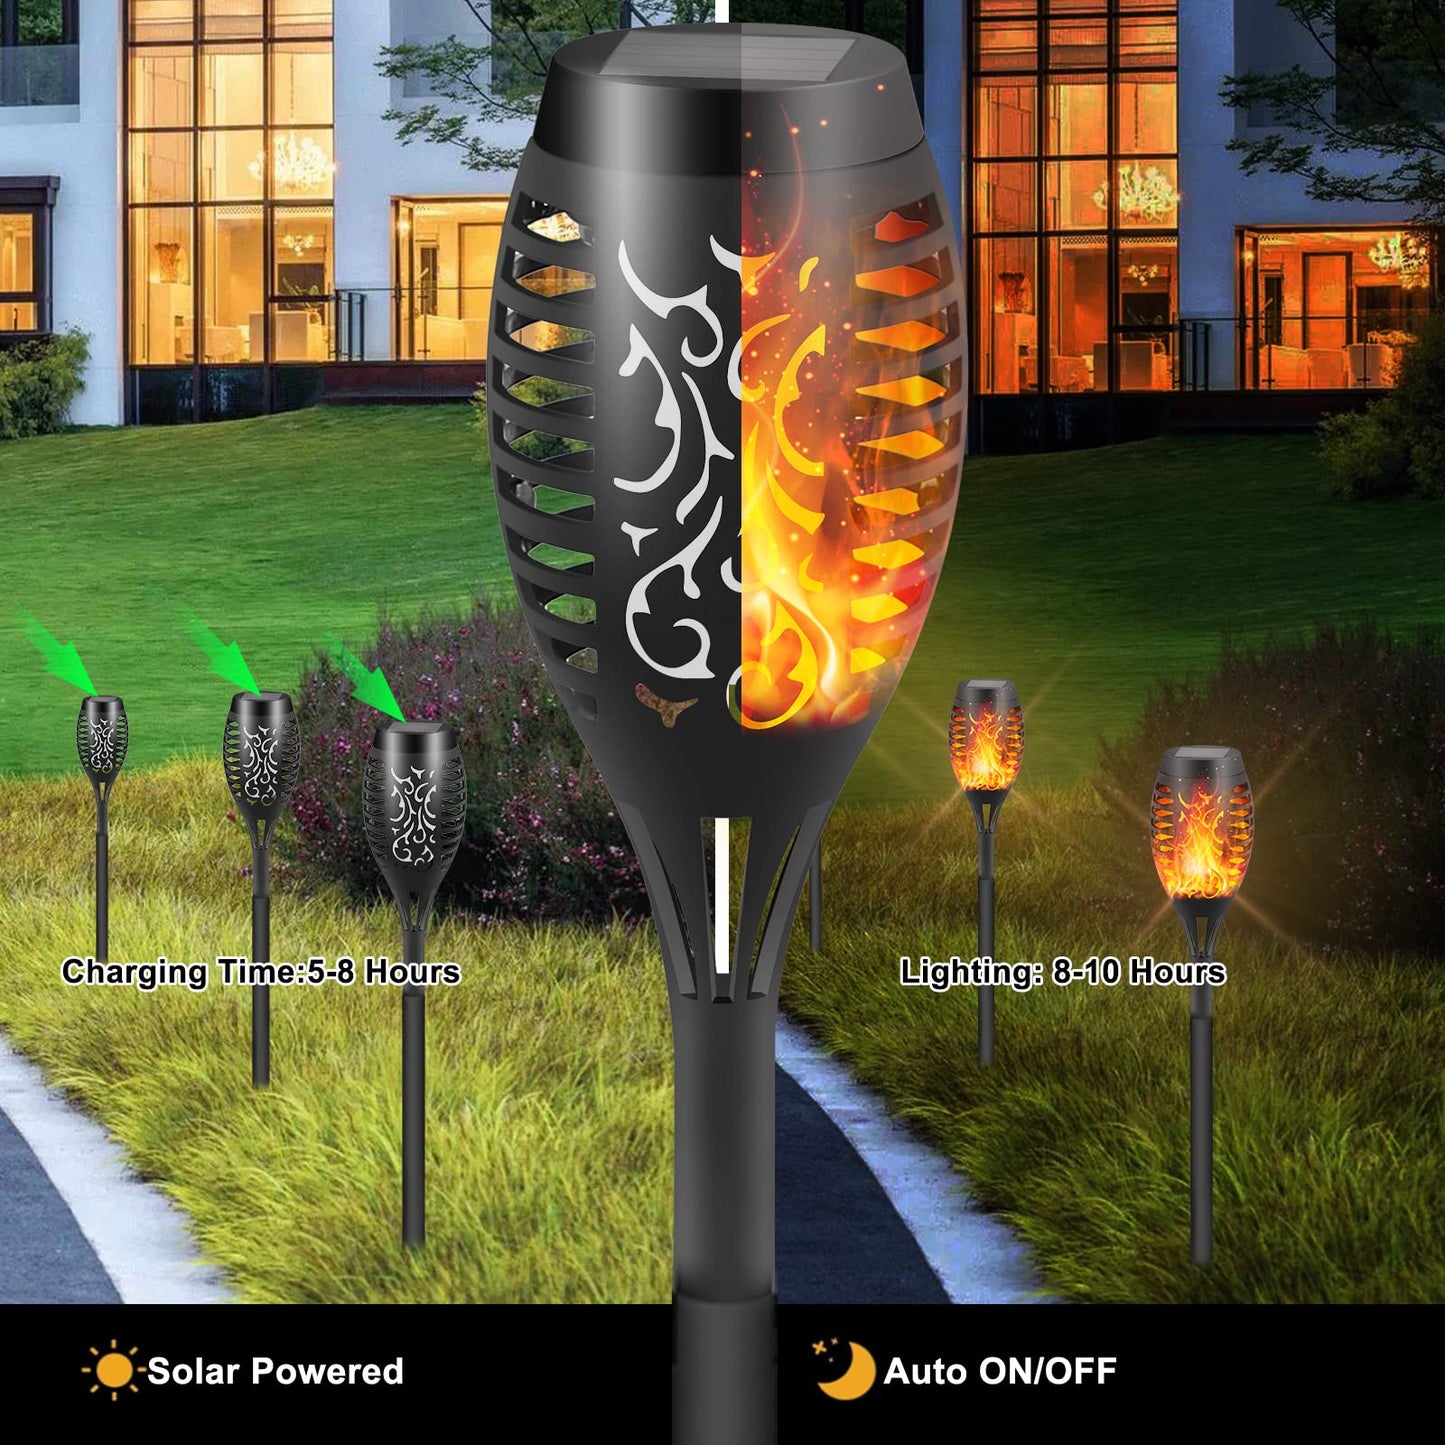 DIKAIDA 6 Pack Solar Lights Torches LED Flickering Flame Outdoor Waterproof Solar Powered Pathway Lights Landscape Lanterns Decoration Lighting Auto On/Off for Garden, Golden (Black)